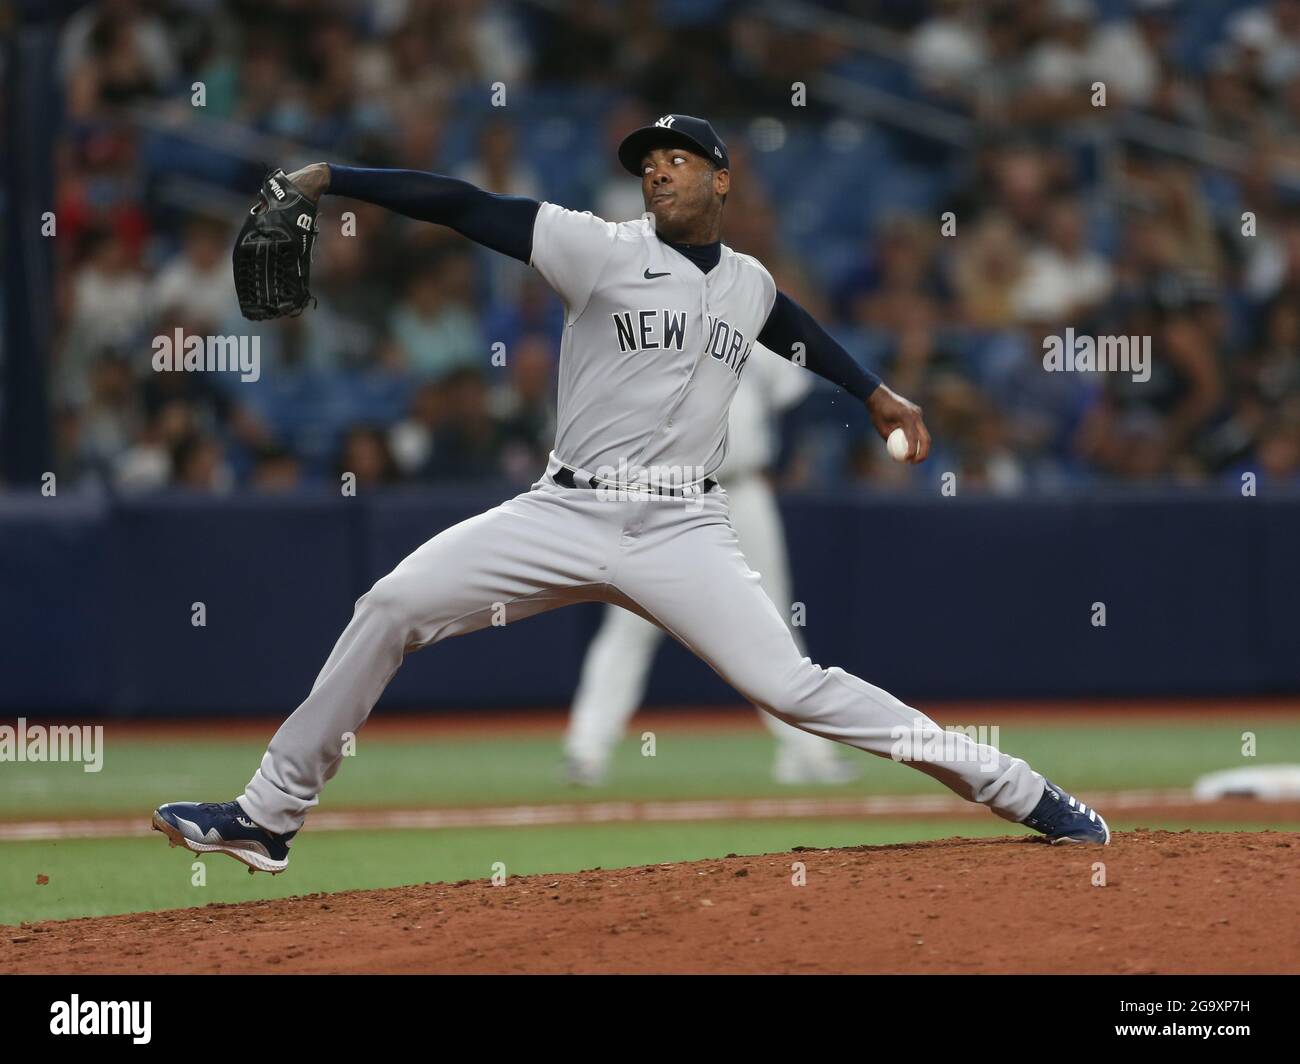 St. Petersburg, FL. USA; New York Yankees relief pitcher Aroldis Chapman  (54) delivers a pitch from the windup during a major league baseball game  ag Stock Photo - Alamy